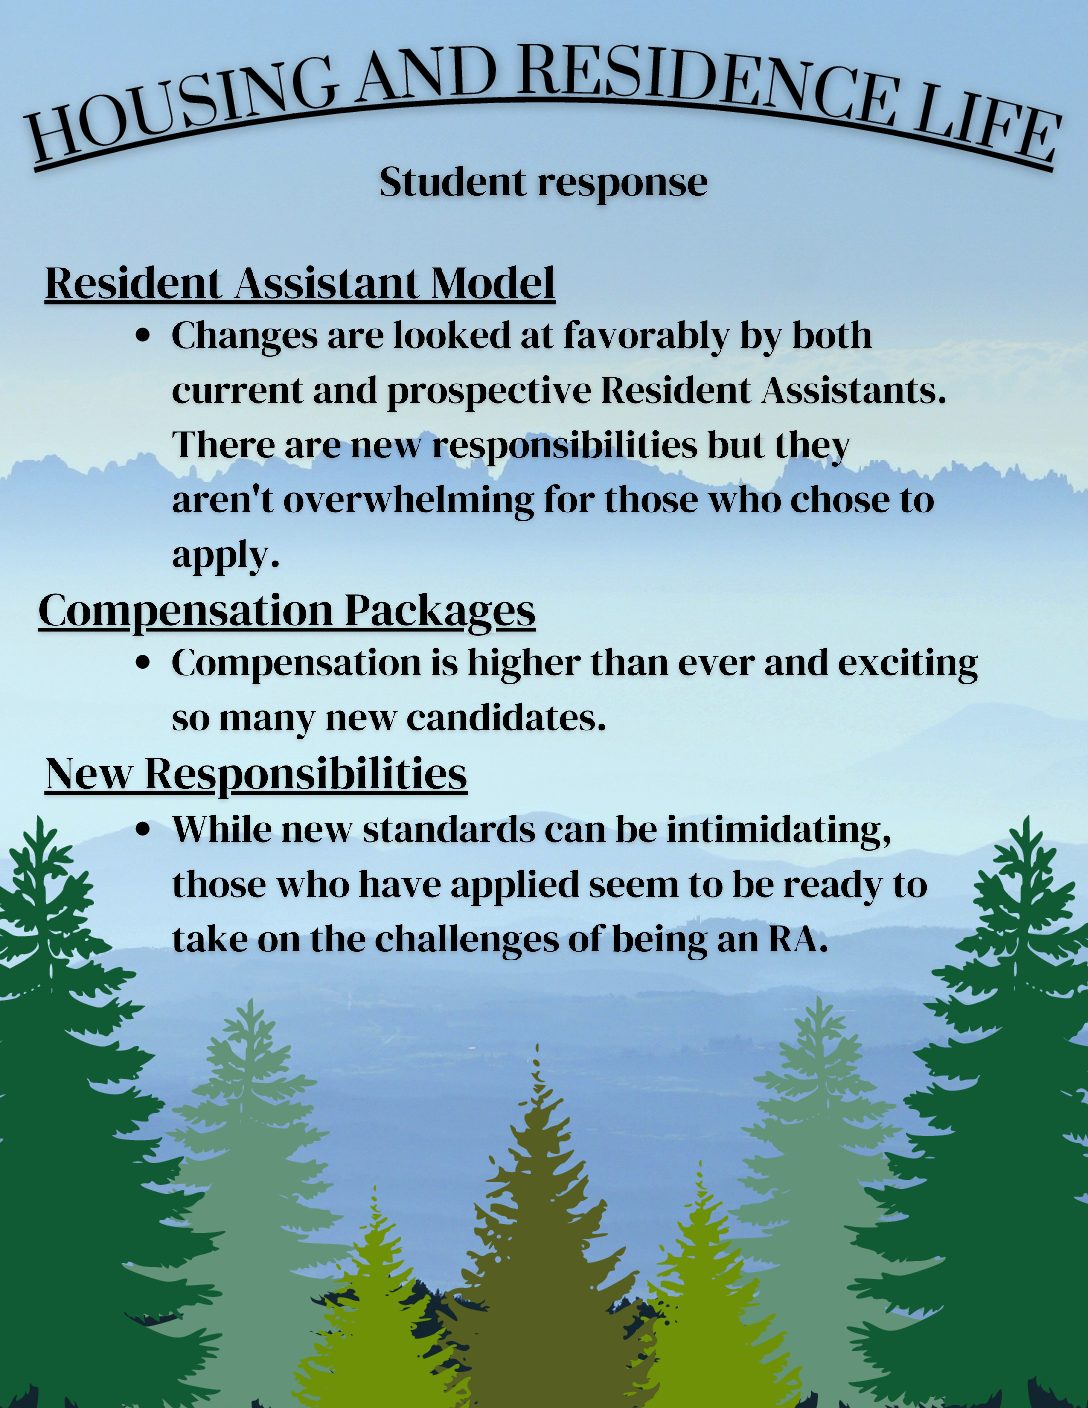 New changes and responsibilities graphic by Cody Ferguson.